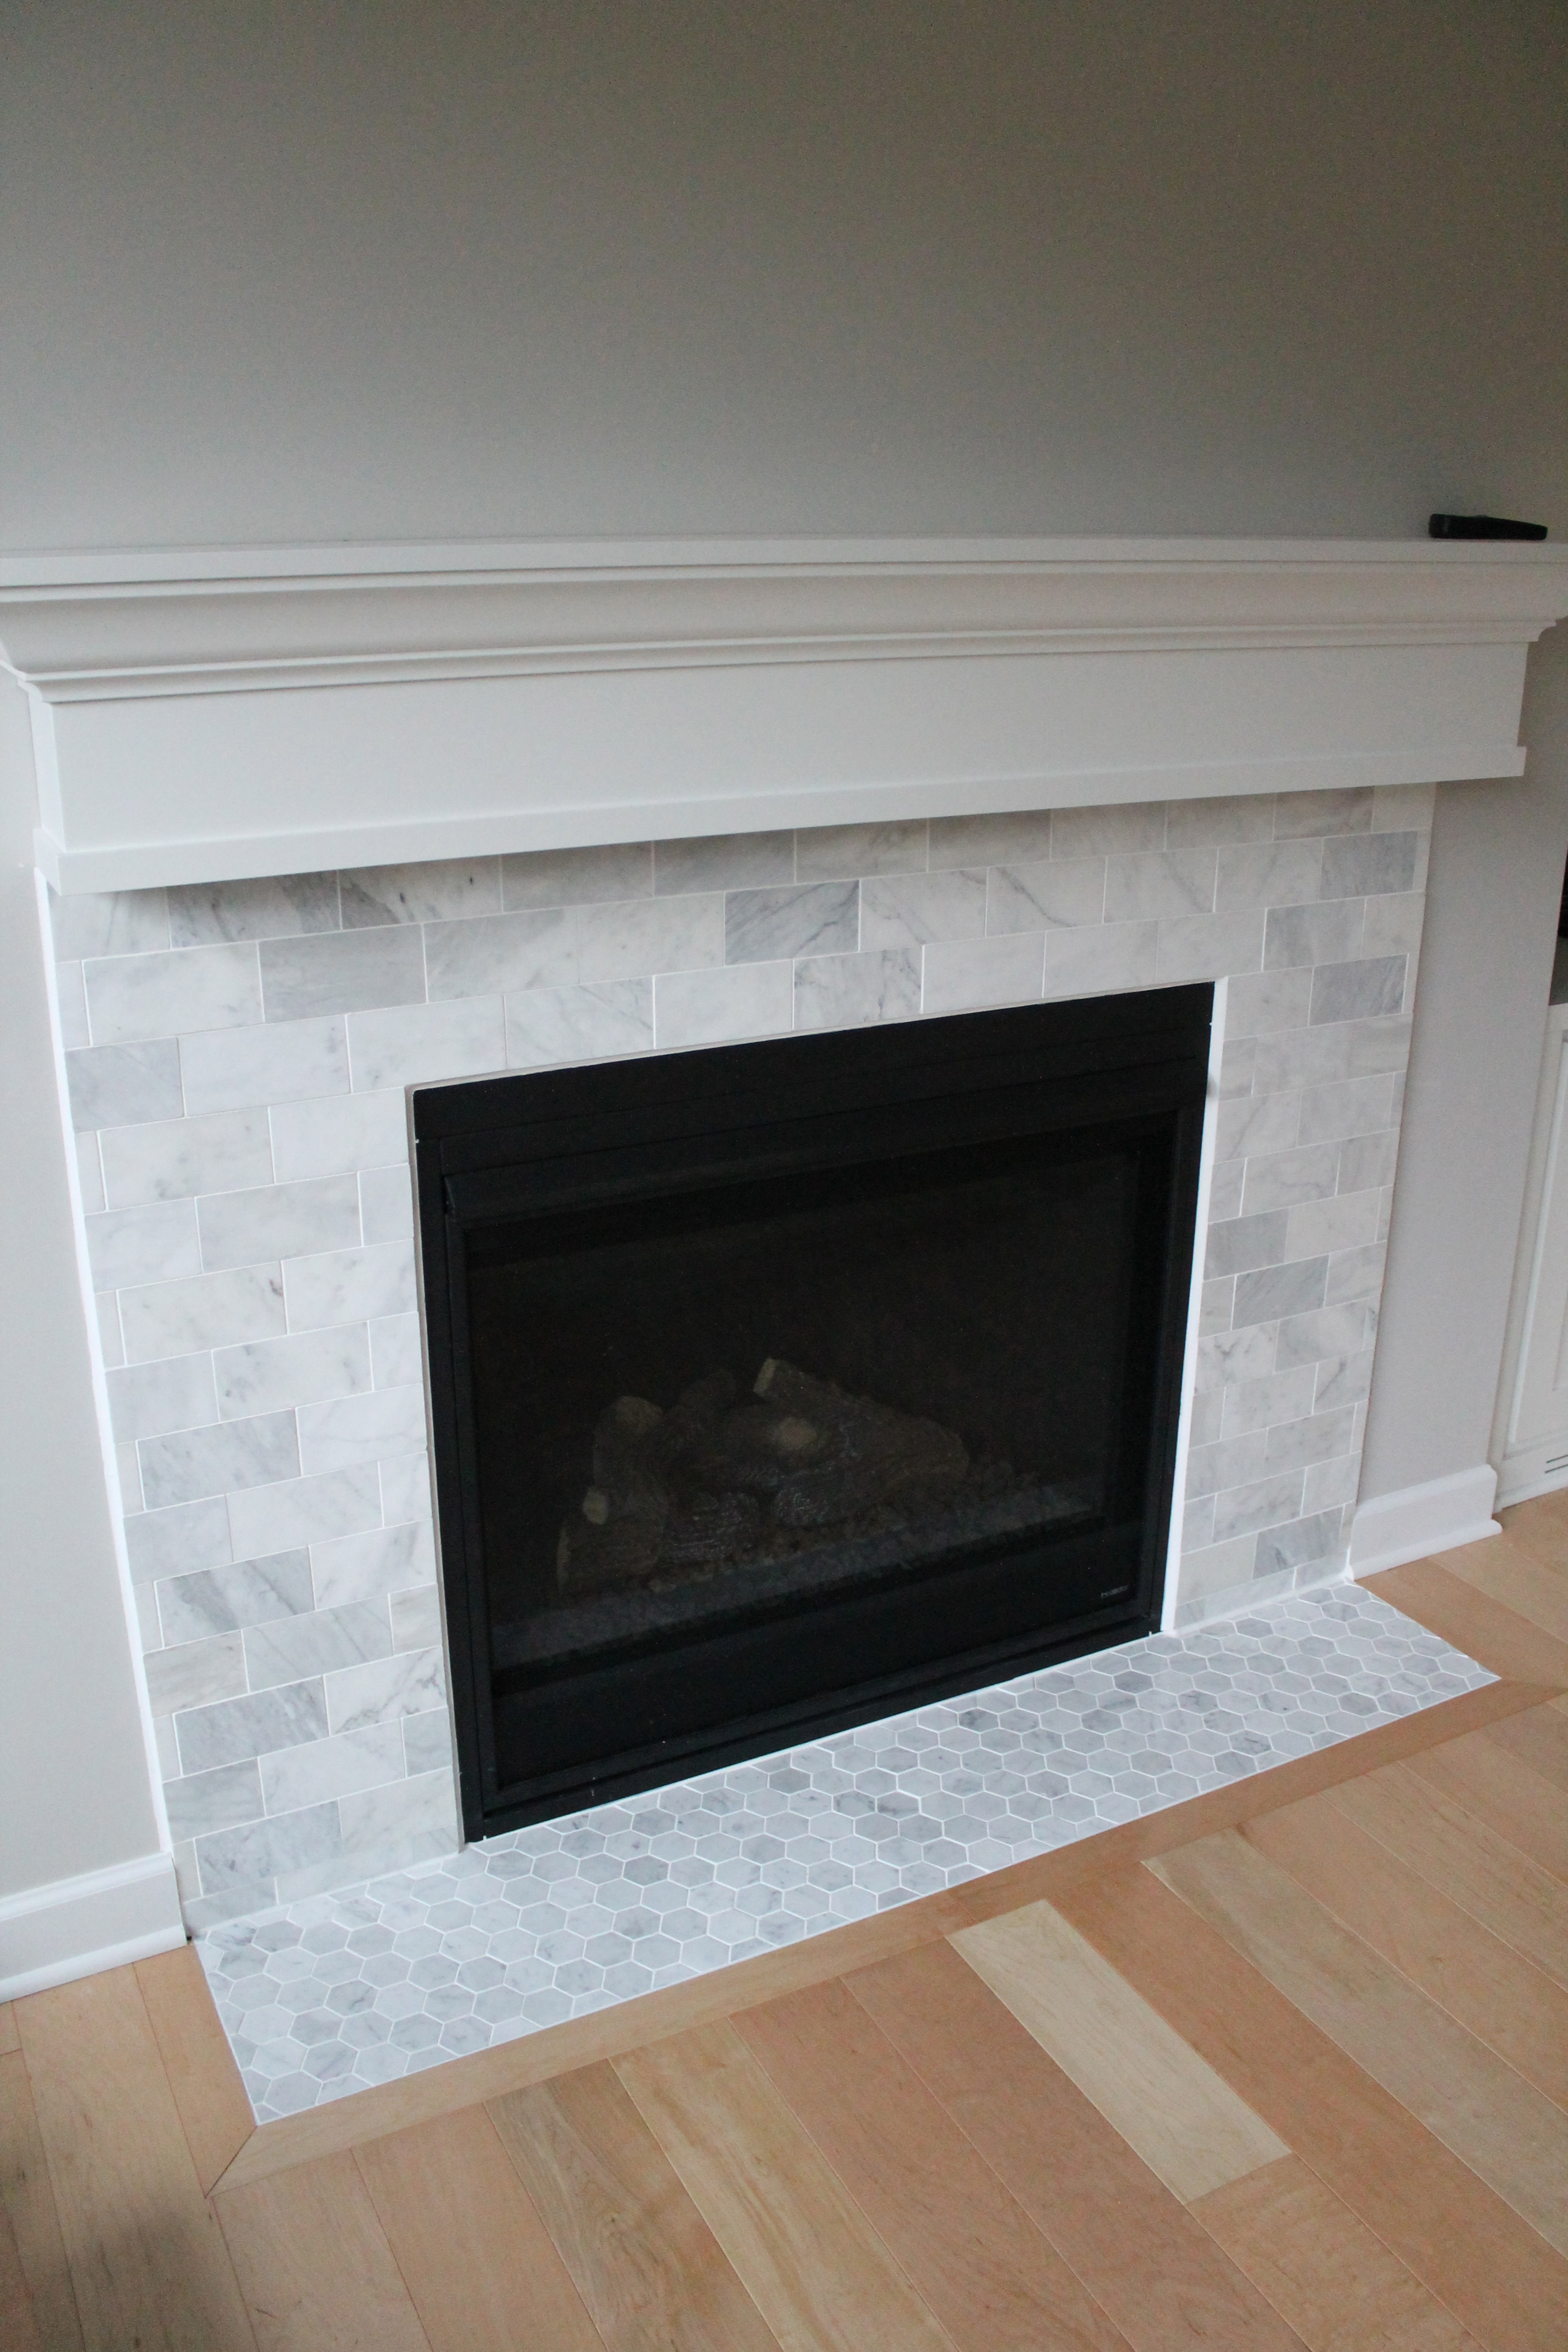 Sears Electric Fireplace Luxury Marble Tile Fireplace Charming Fireplace